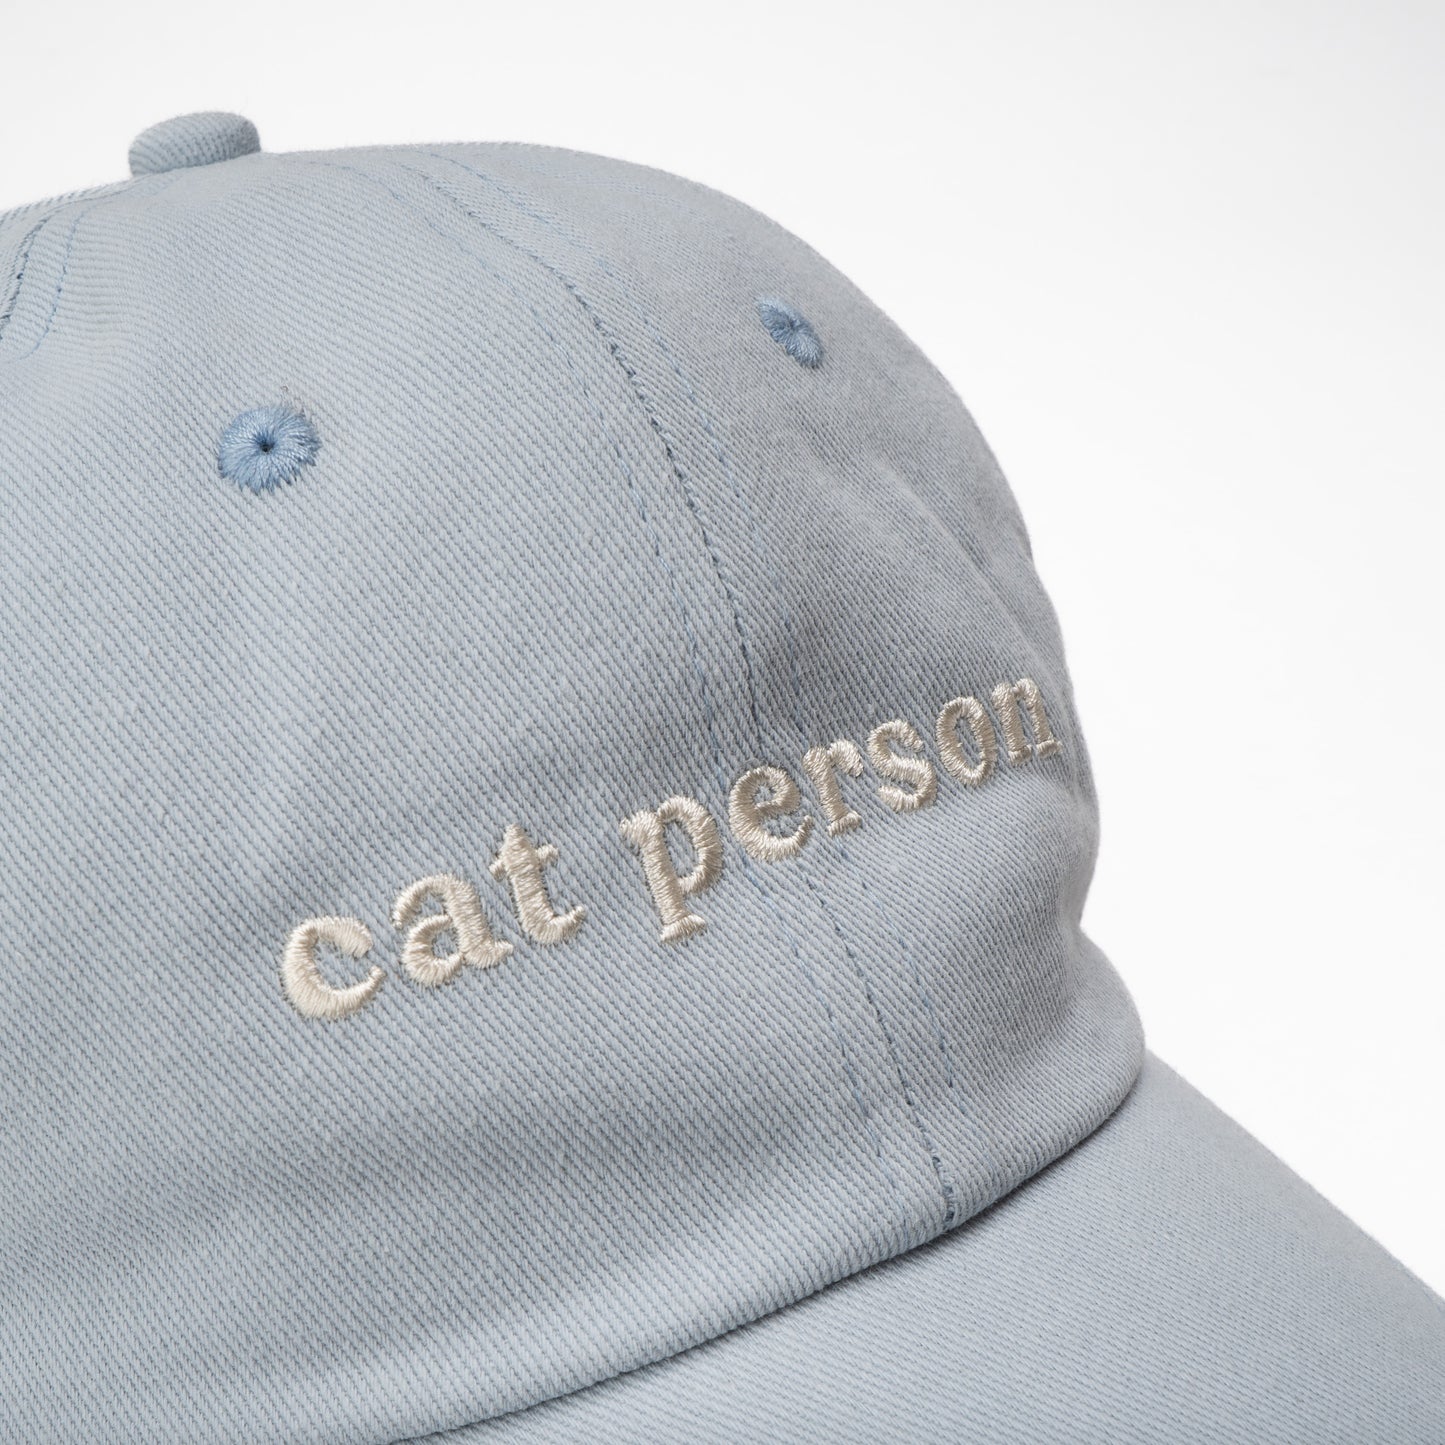 Cat Person Hat